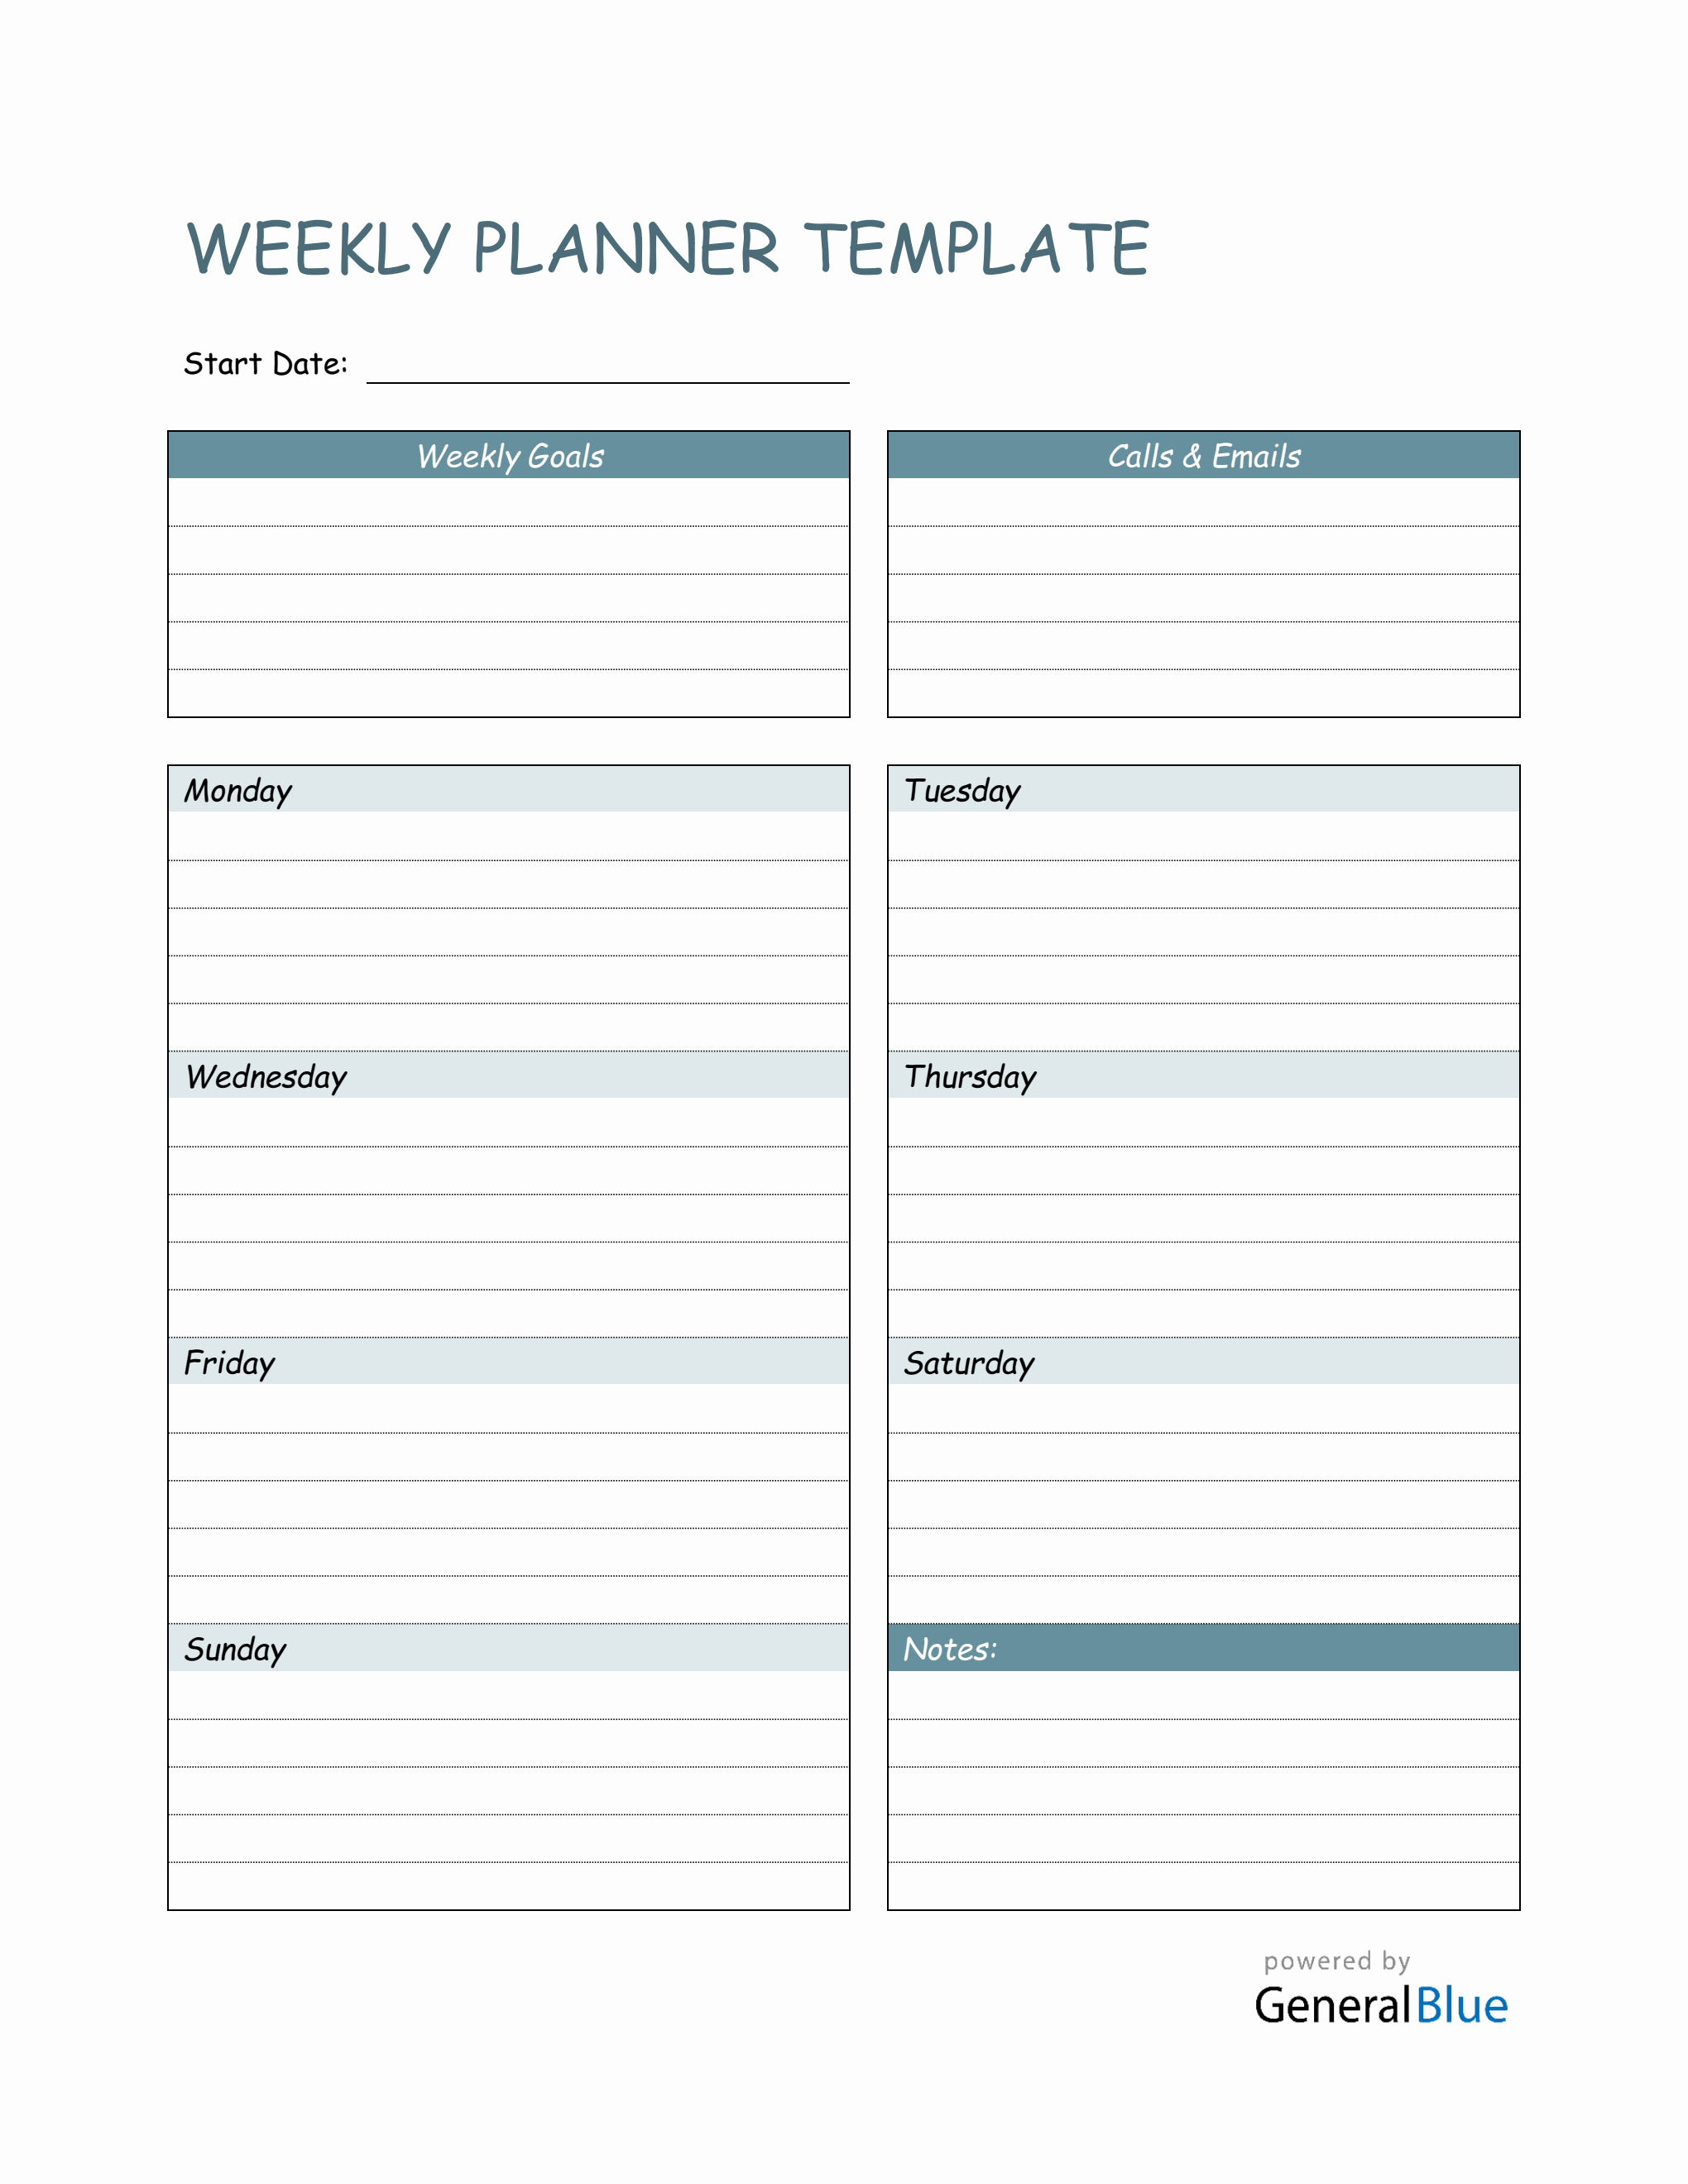 Weekly Planner Templates Professional Word Templates Riset